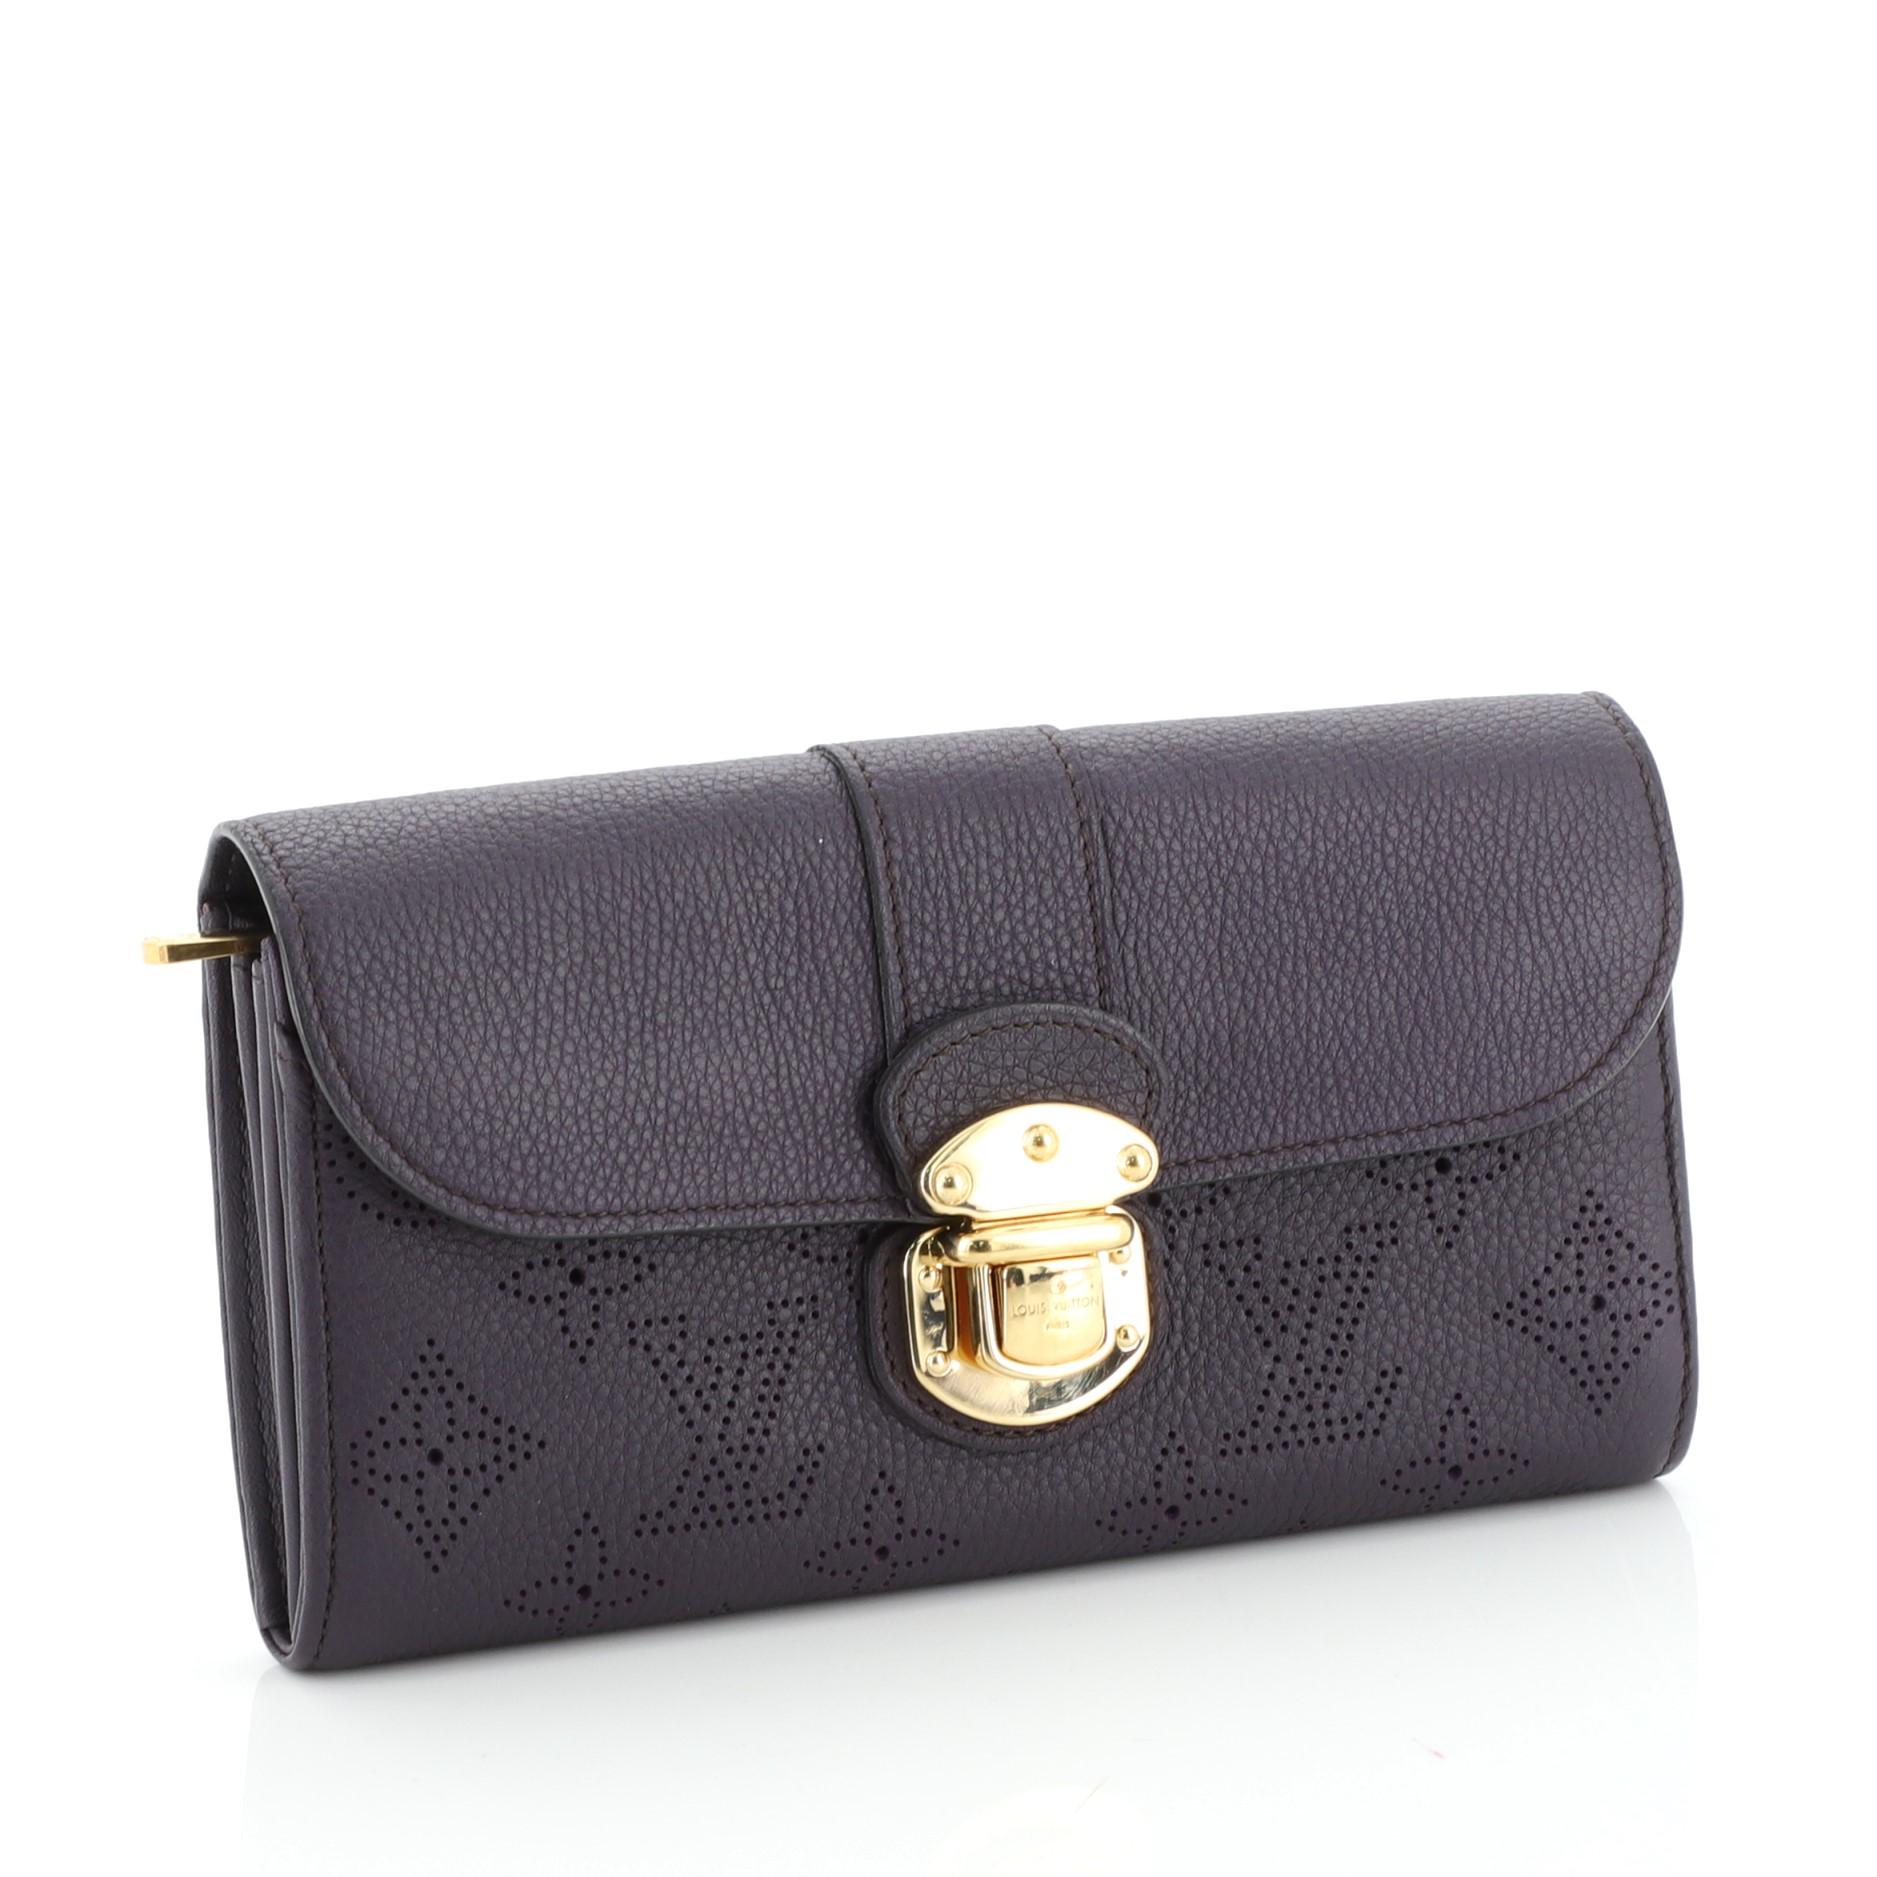 This Louis Vuitton Iris Wallet Mahina Leather, crafted from purple monogram mahina leather, features frontal flap with gold-tone hardware. Its push lock closure opens to a purple leather interior with multiple card slots, middle zip compartment, and